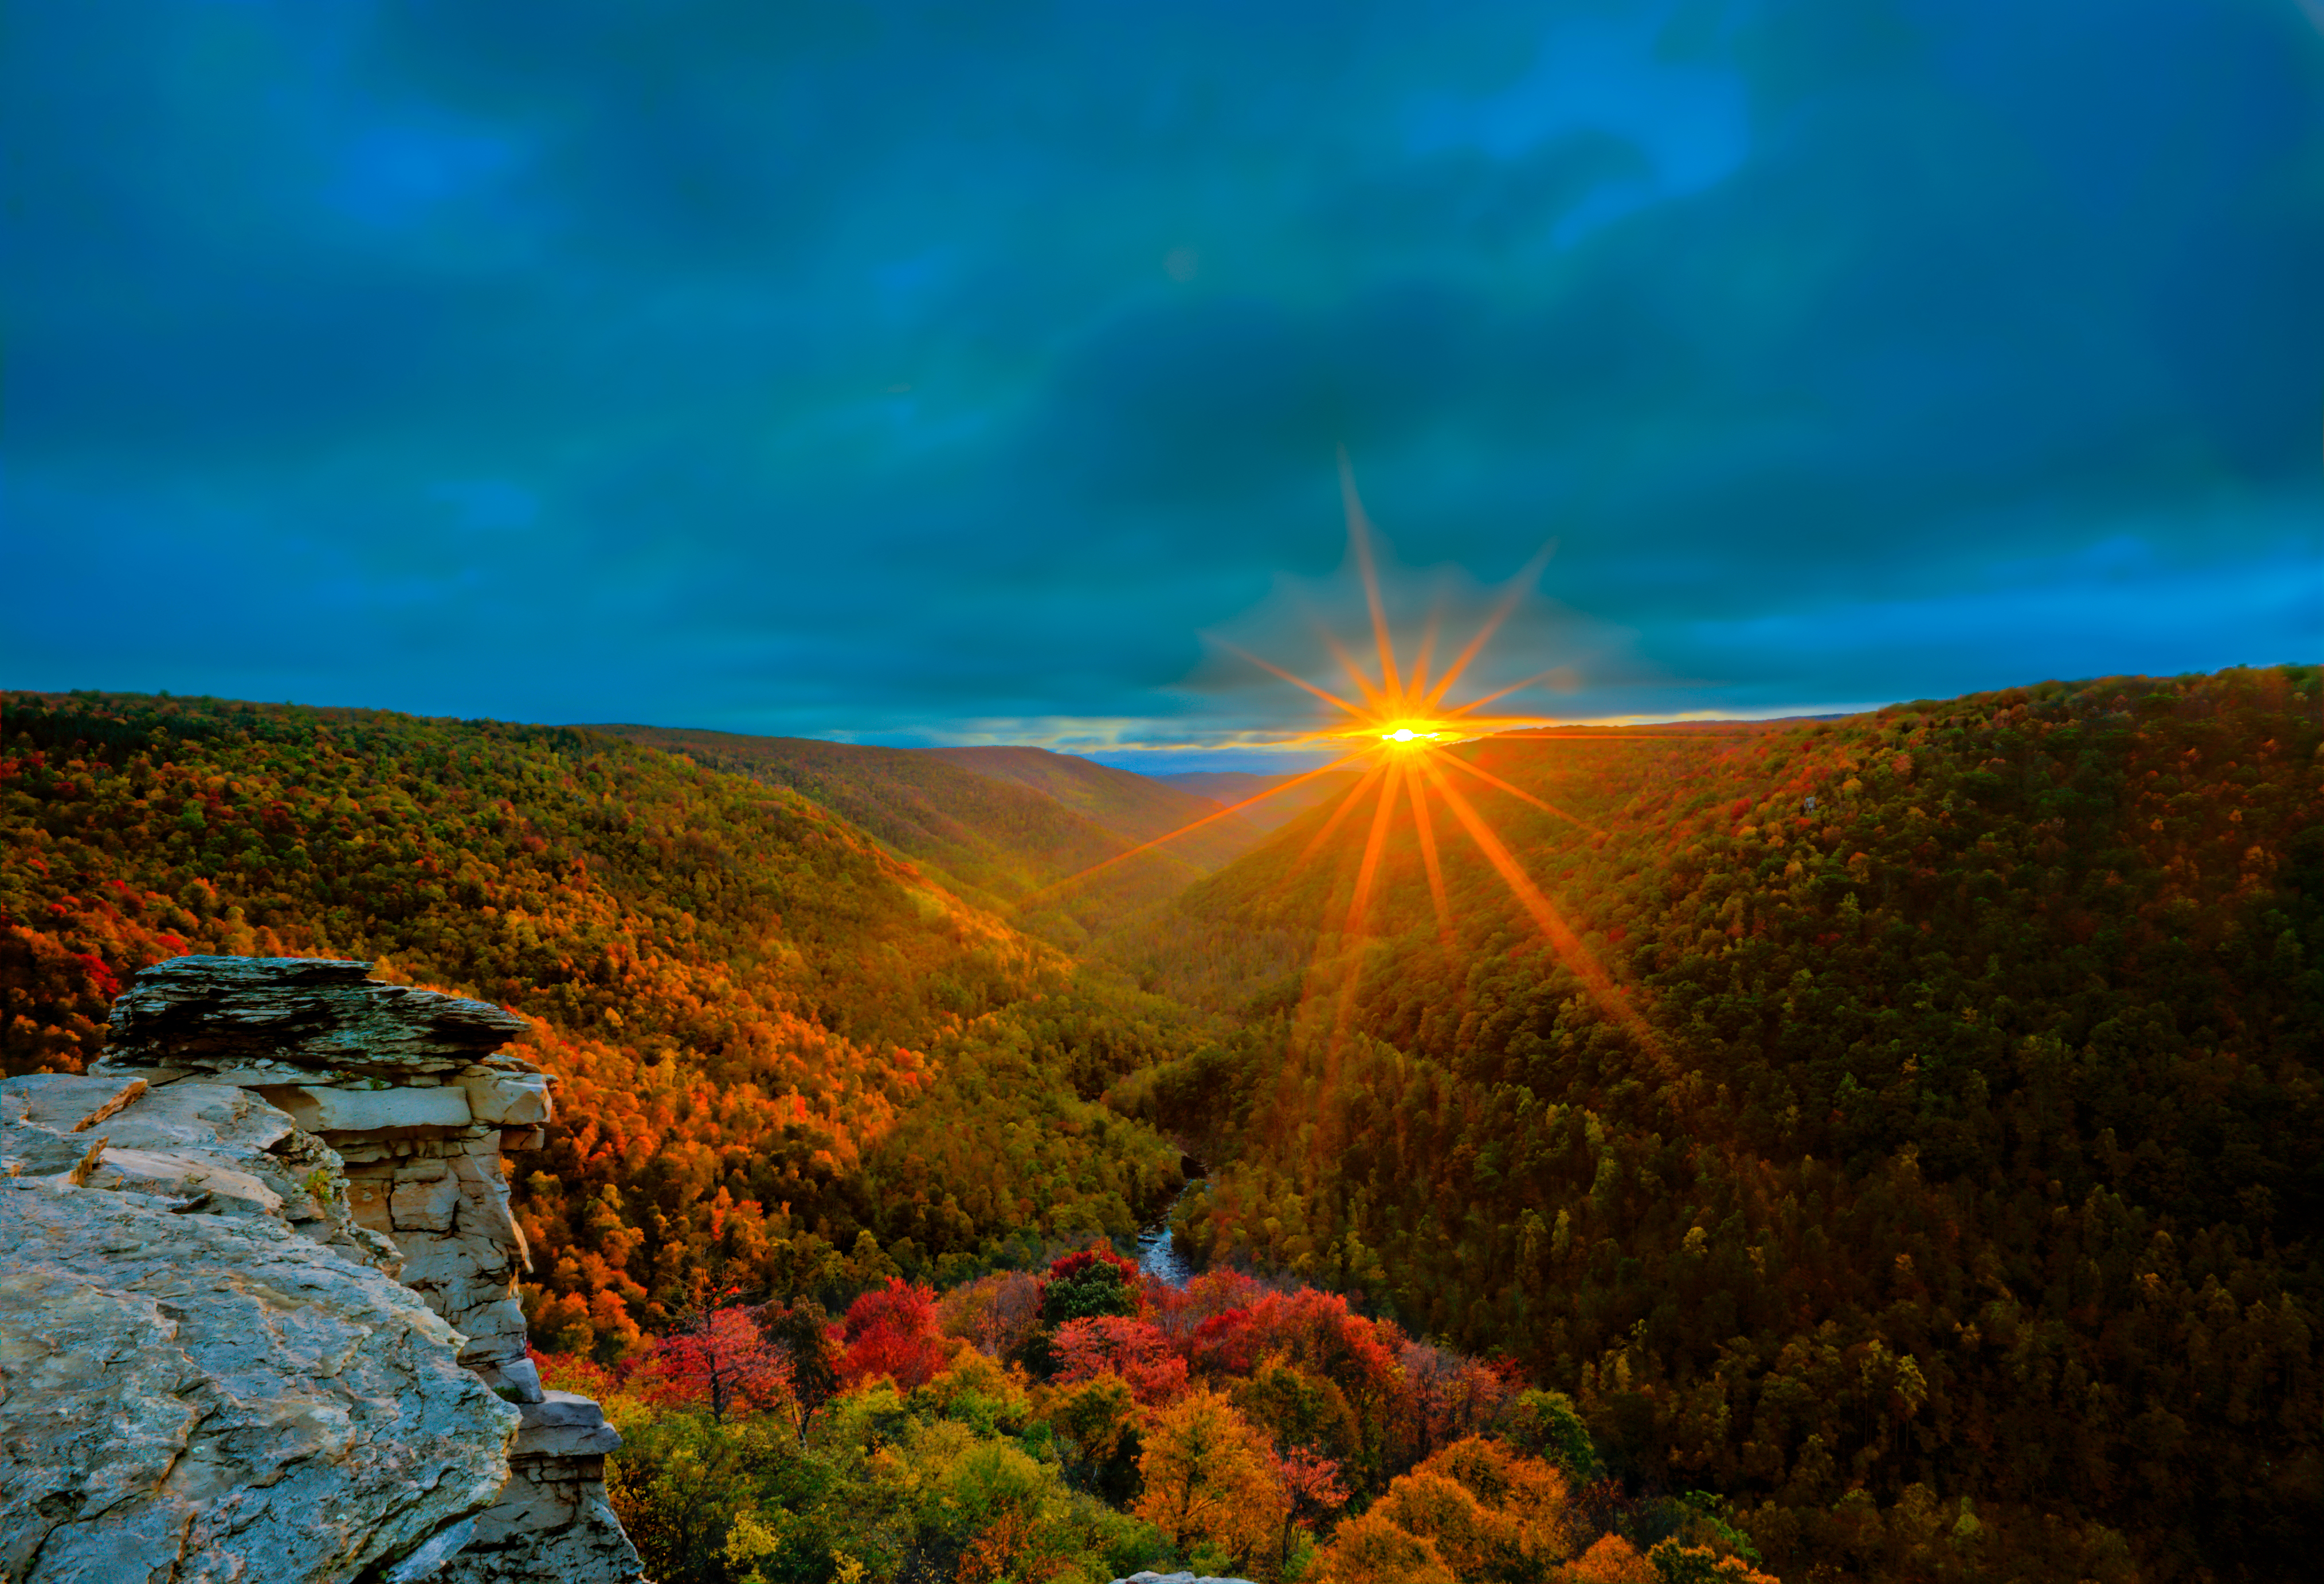 A captivating sunset view of West Virginia | Source: Shutterstock